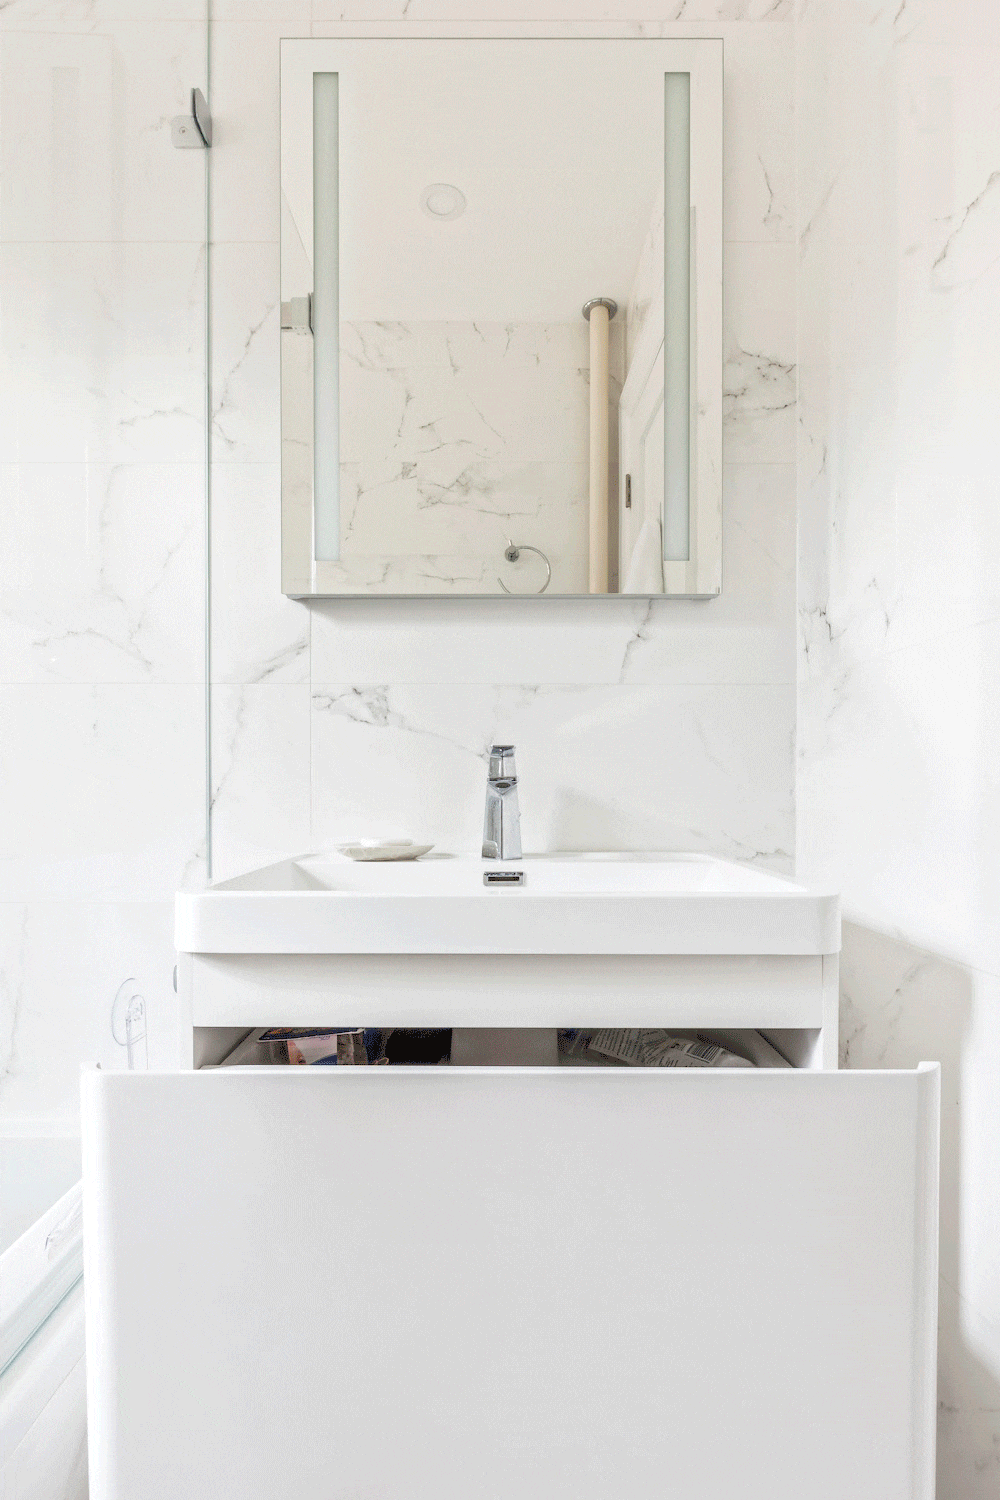 Moving image of the bathroom vanity features